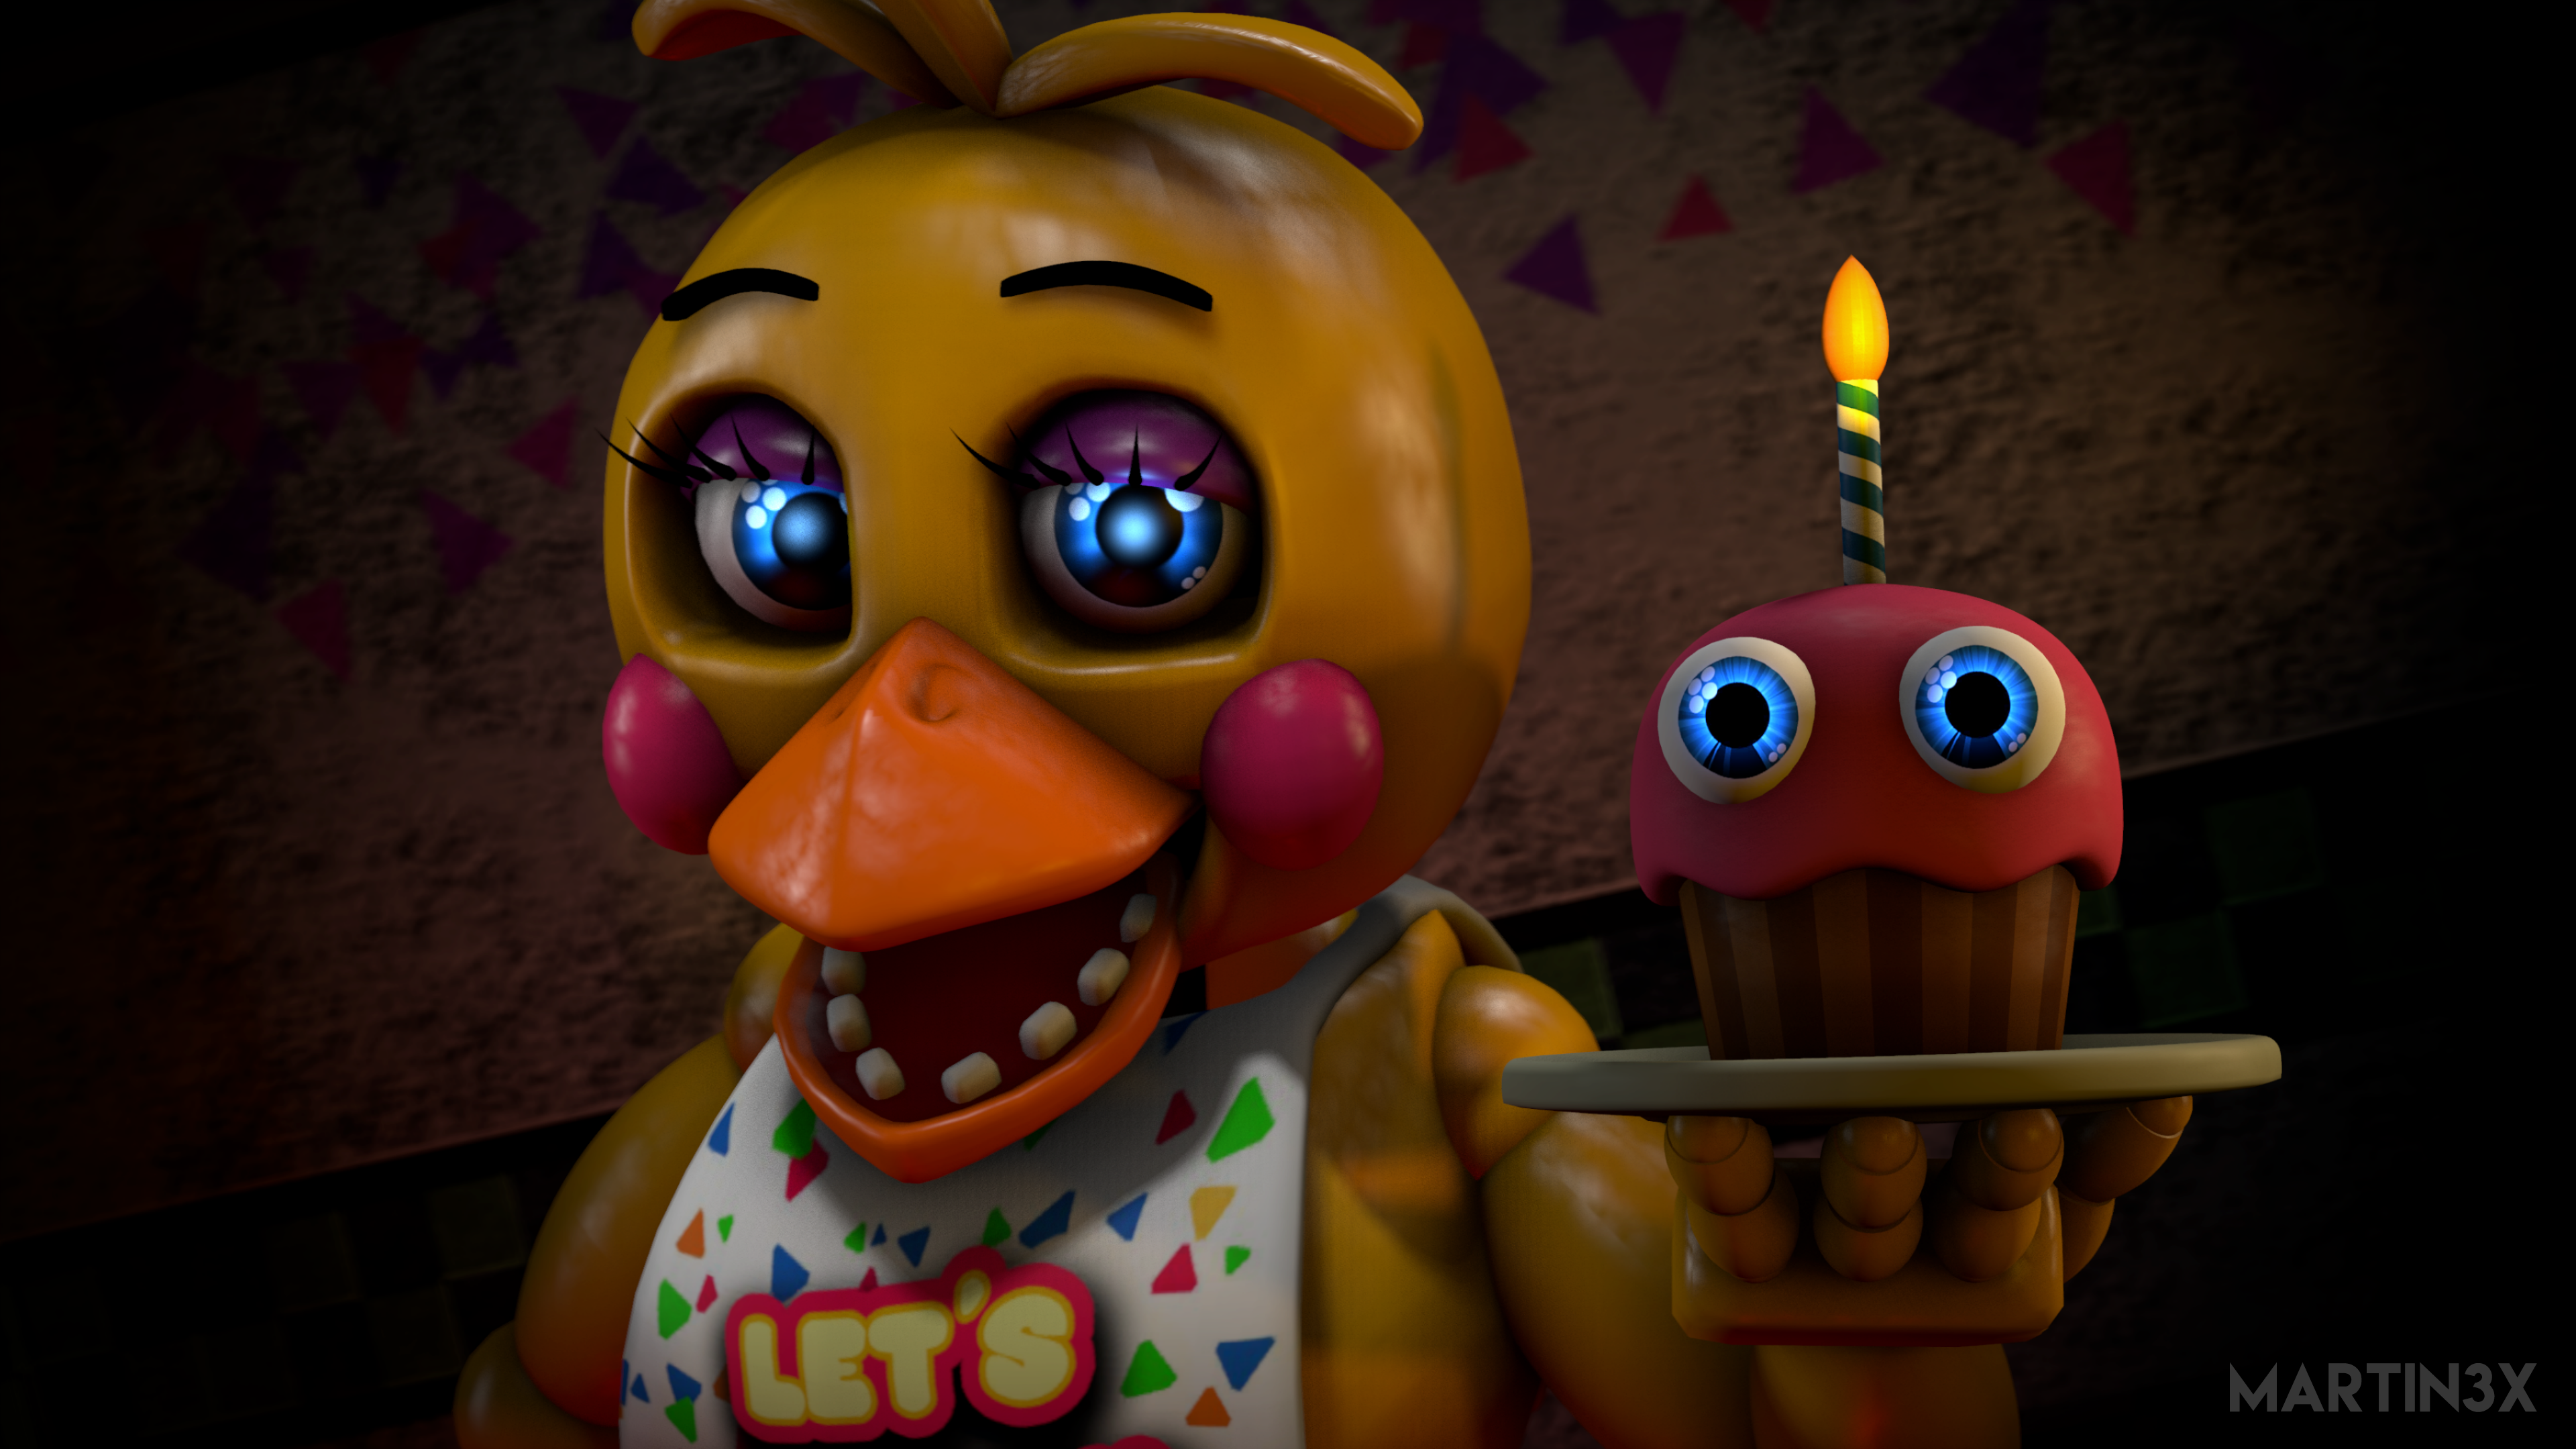 Free download Five Nights at Freddys image toy chica 4 by martin3x dadqsrf HD [3840x2160] for your Desktop, Mobile & Tablet. Explore Chica Wallpaper. FNAF Chica Wallpaper, Chica Wallpaper, Fnaf Wallpaper Chica